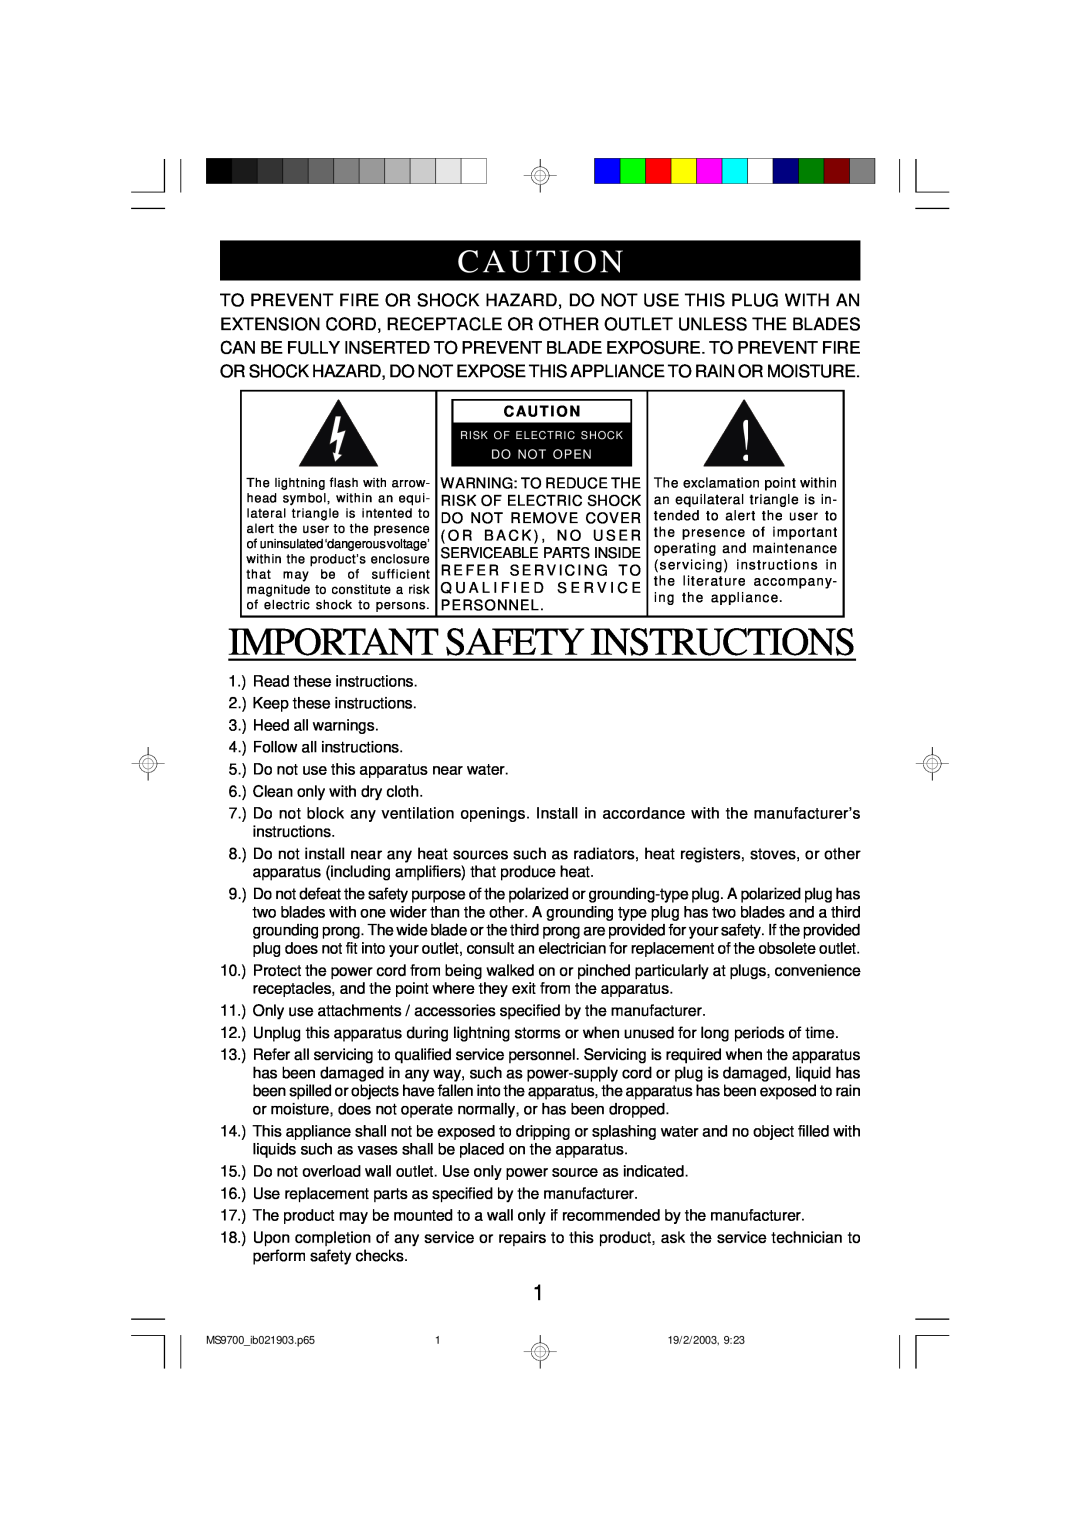 Emerson MS9700 owner manual Important Safety Instructions, Caut I On, Caut I O N 